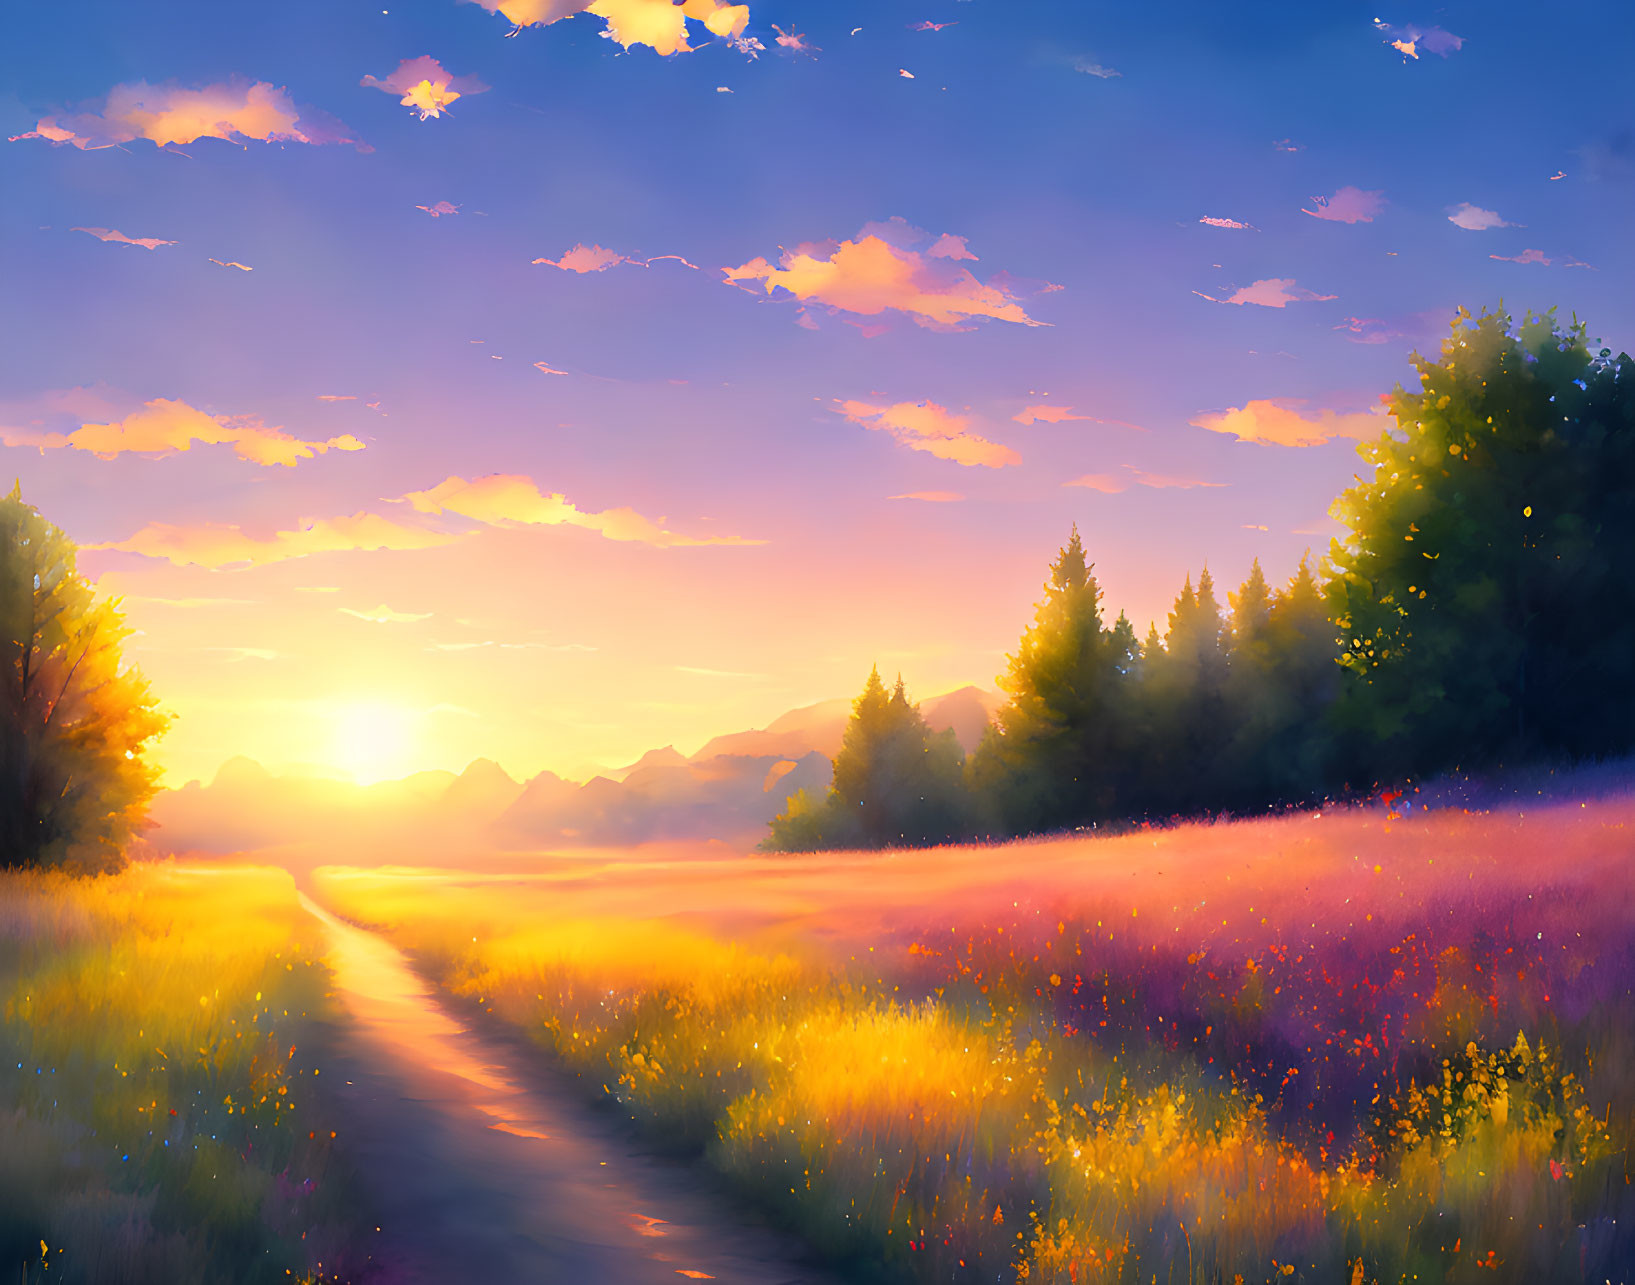 Scenic sunset over blooming meadow and mountains